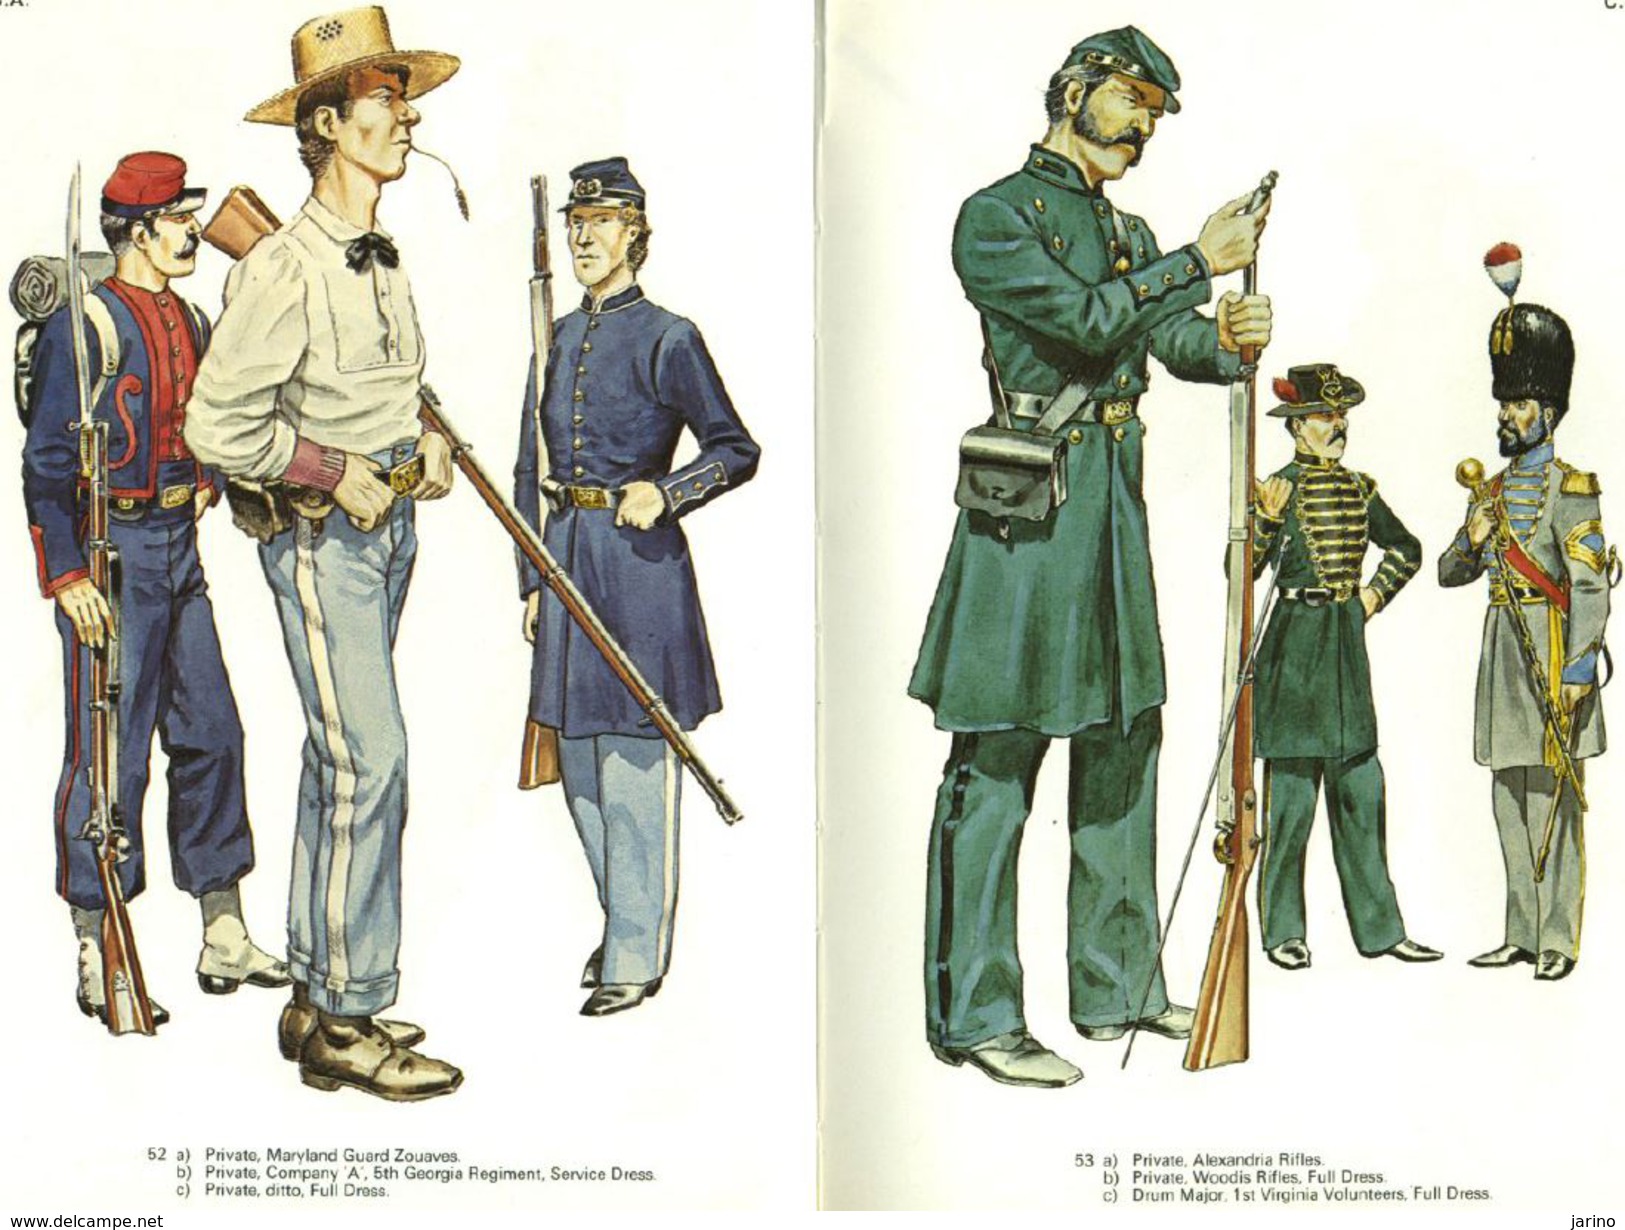 Uniforms of the American Civil War in colour 1861-1865,99 pages sur DVD,more than 210 uniforms photos and described